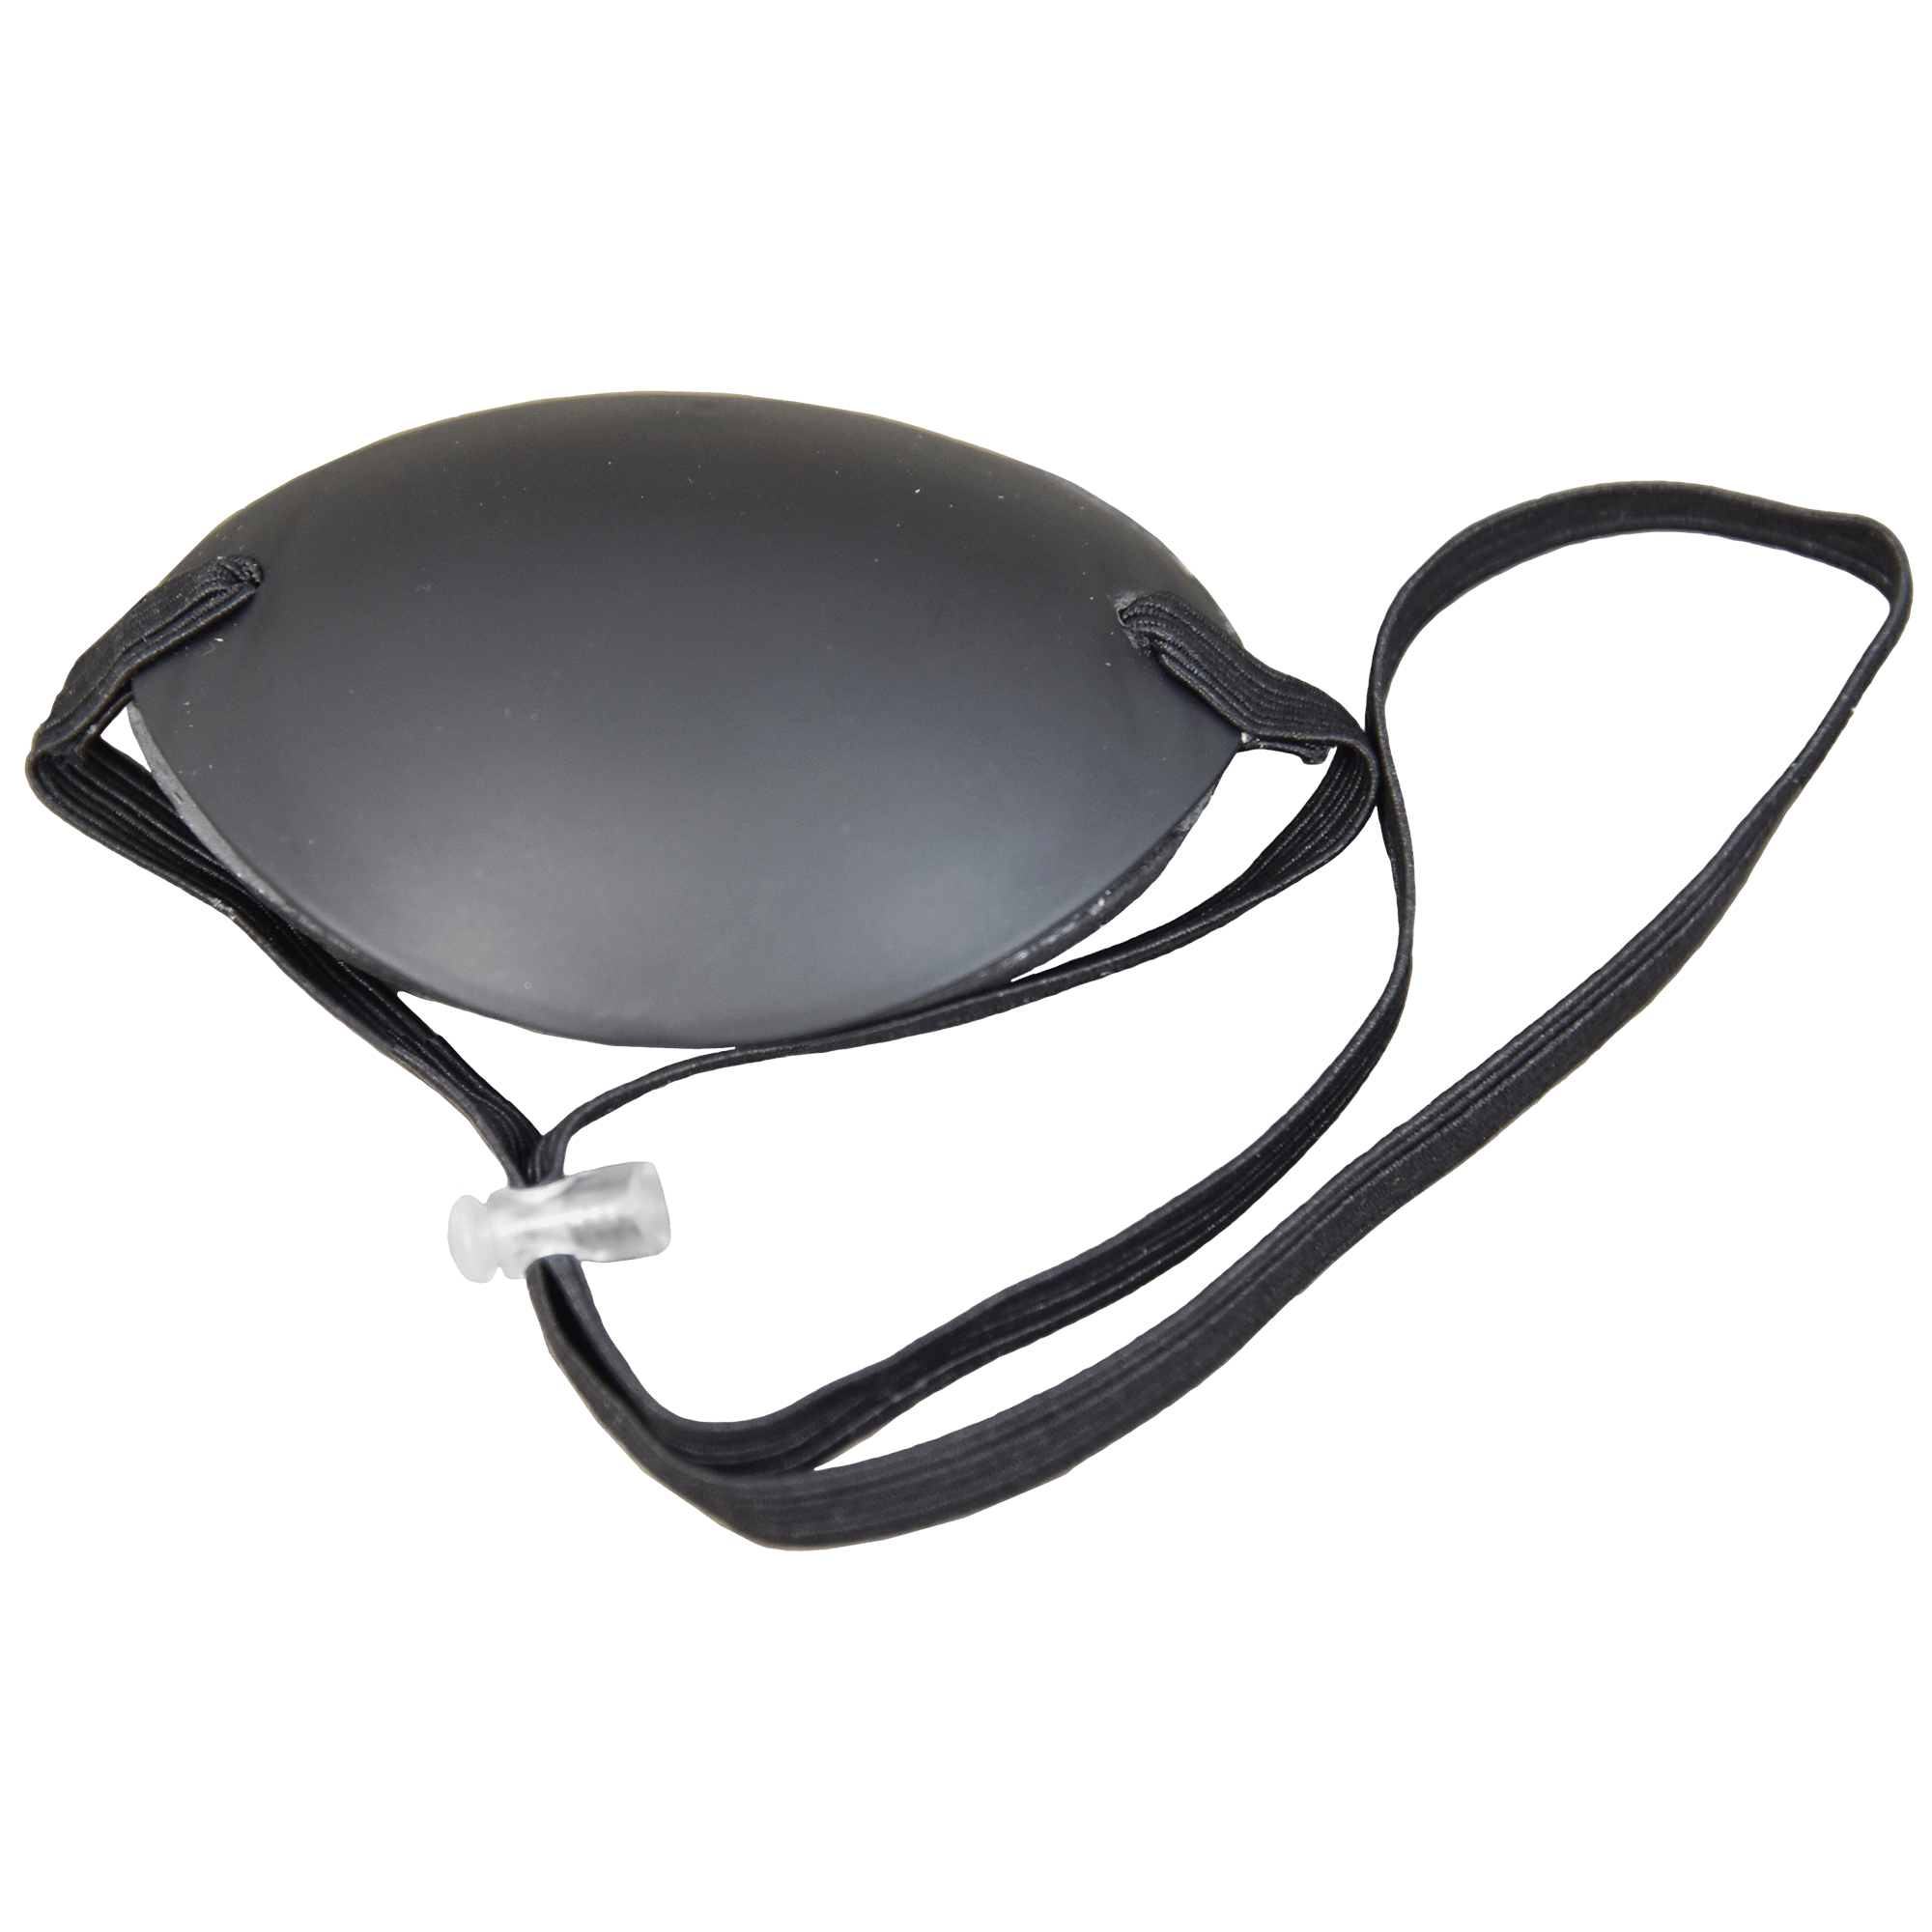 Good-Lite Adult Medical Eye Shield with Wide Elastic Strap and Cord lock